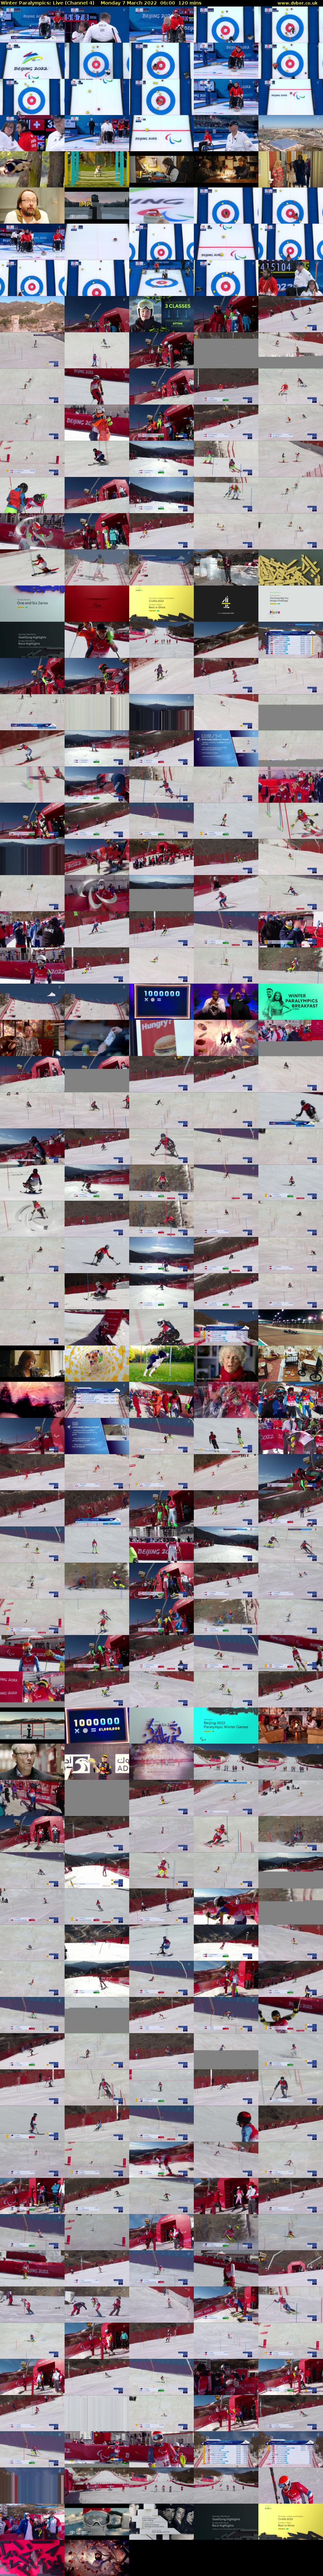 Winter Paralympics: Live (Channel 4) Monday 7 March 2022 06:00 - 08:00